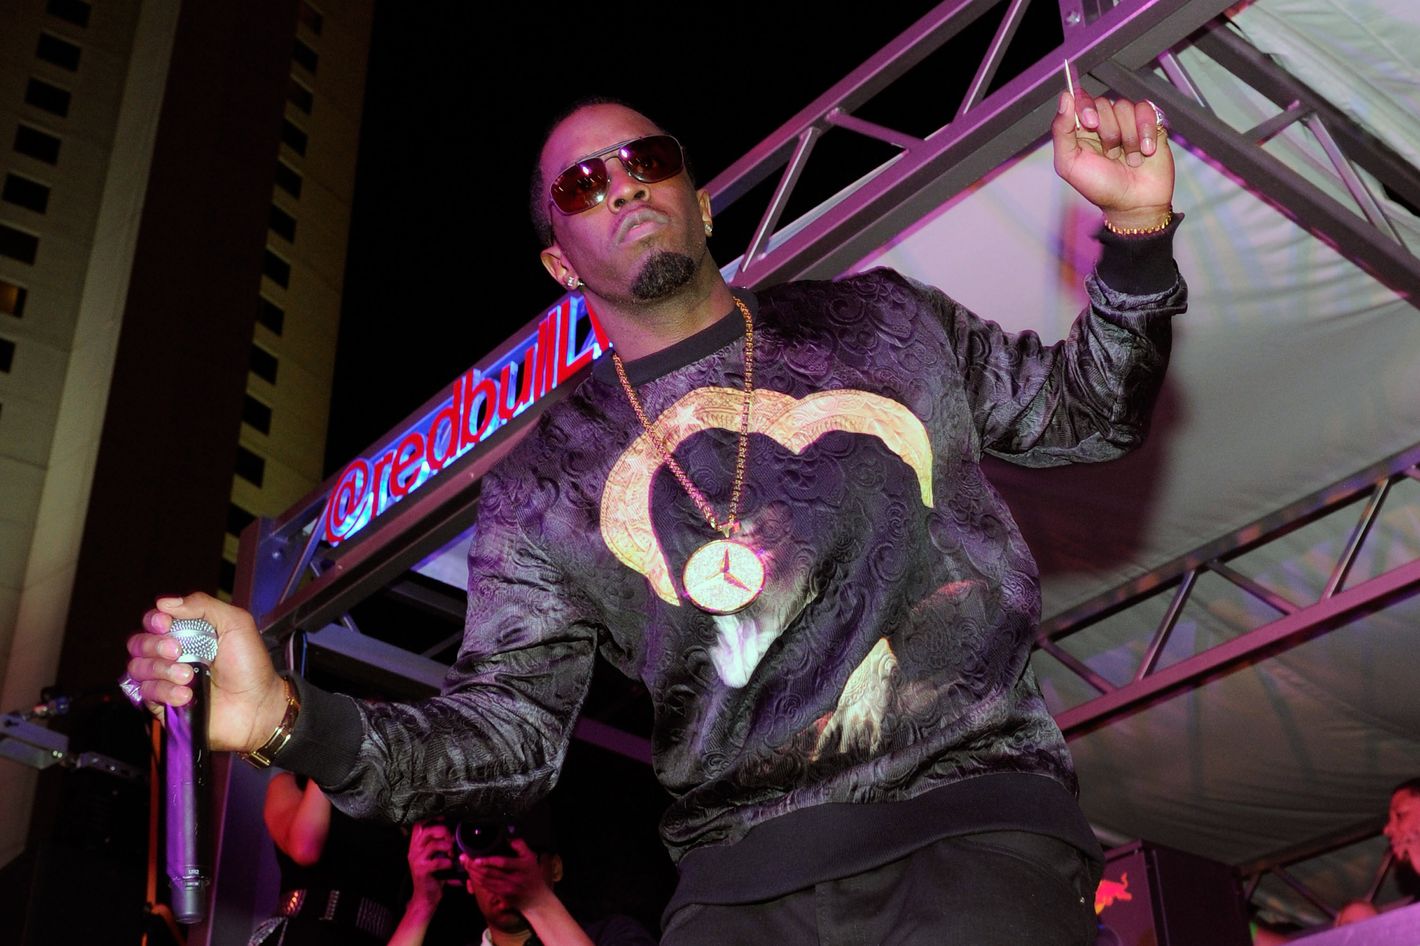 Diddy Is Puff Daddy Again, Teases New Single